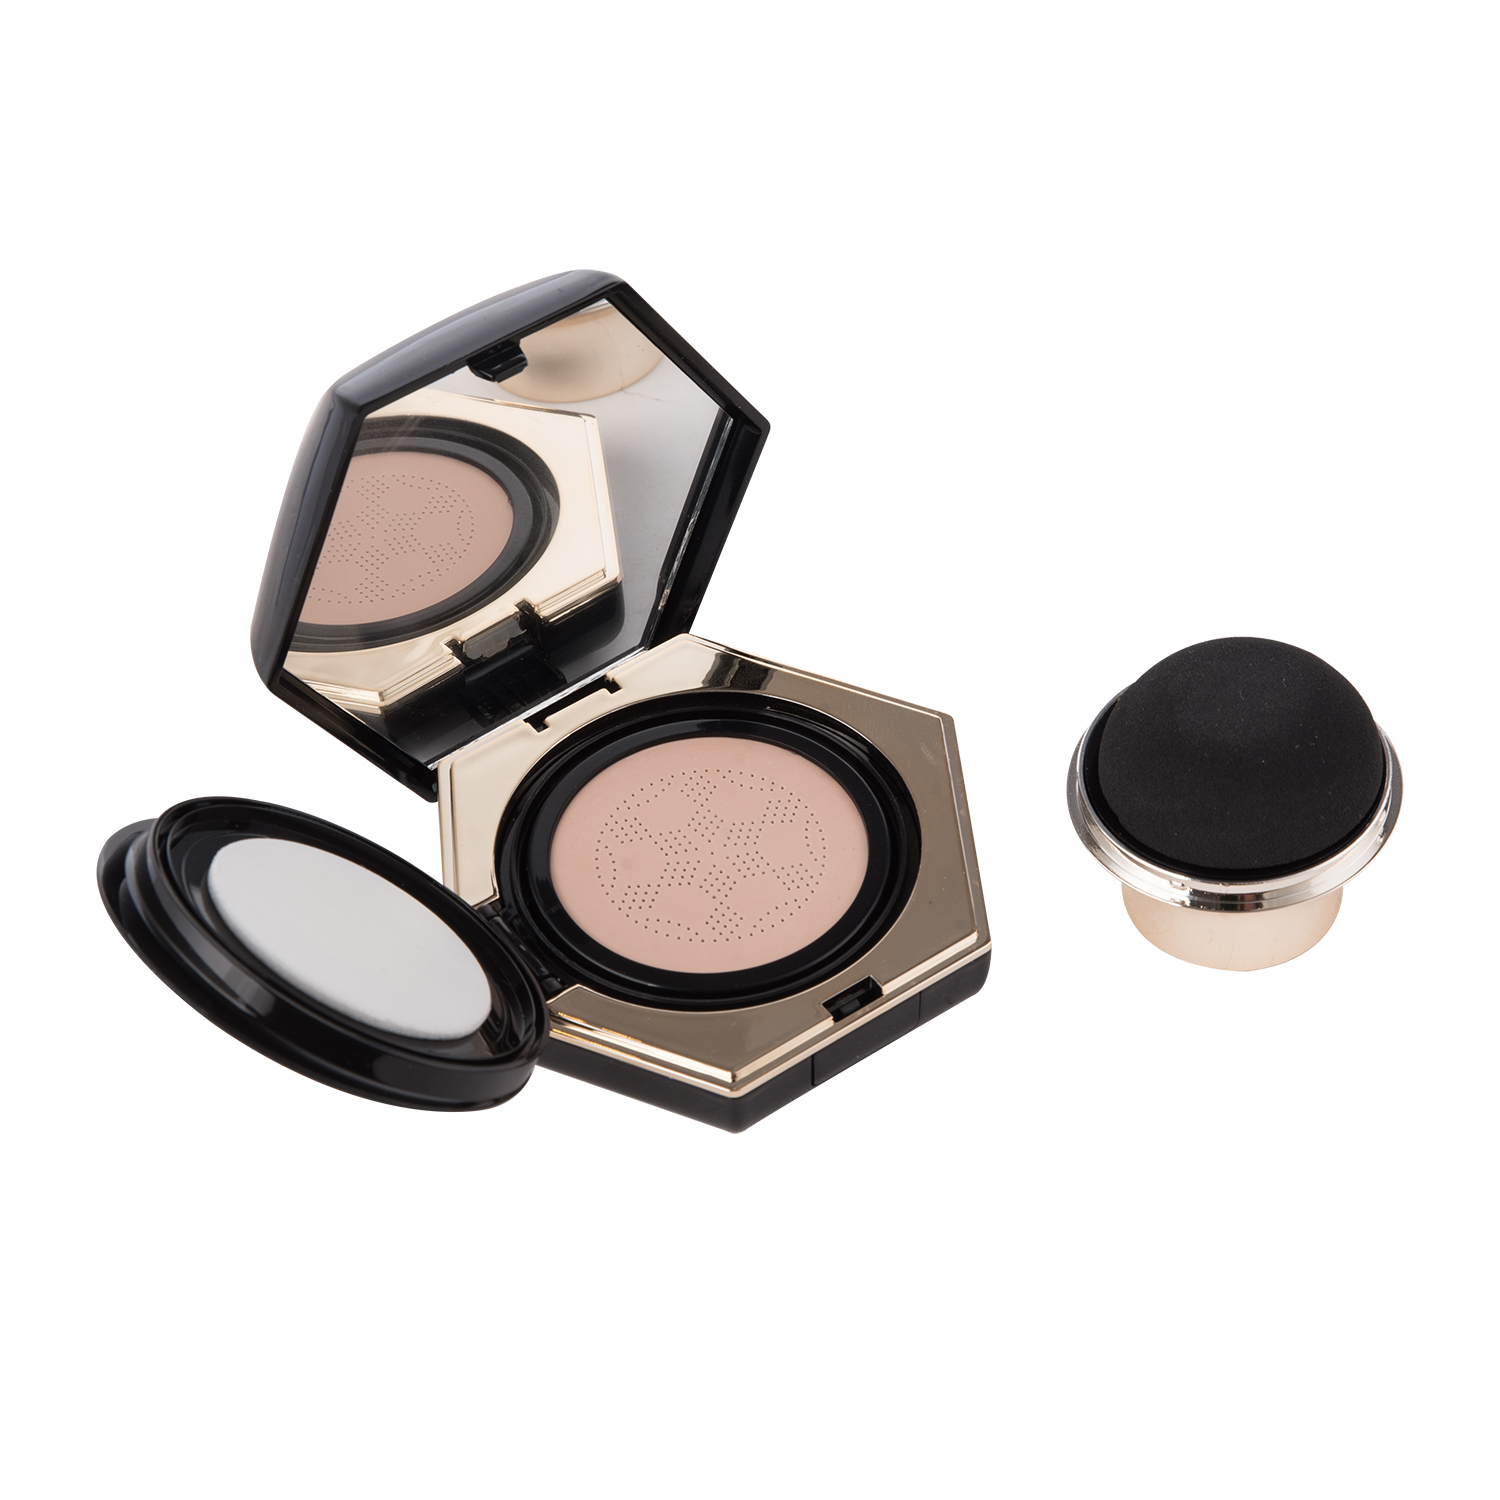 10g Polygon Powder Compact Case with Mirror and Mushroom Puff Empty Makeup Case